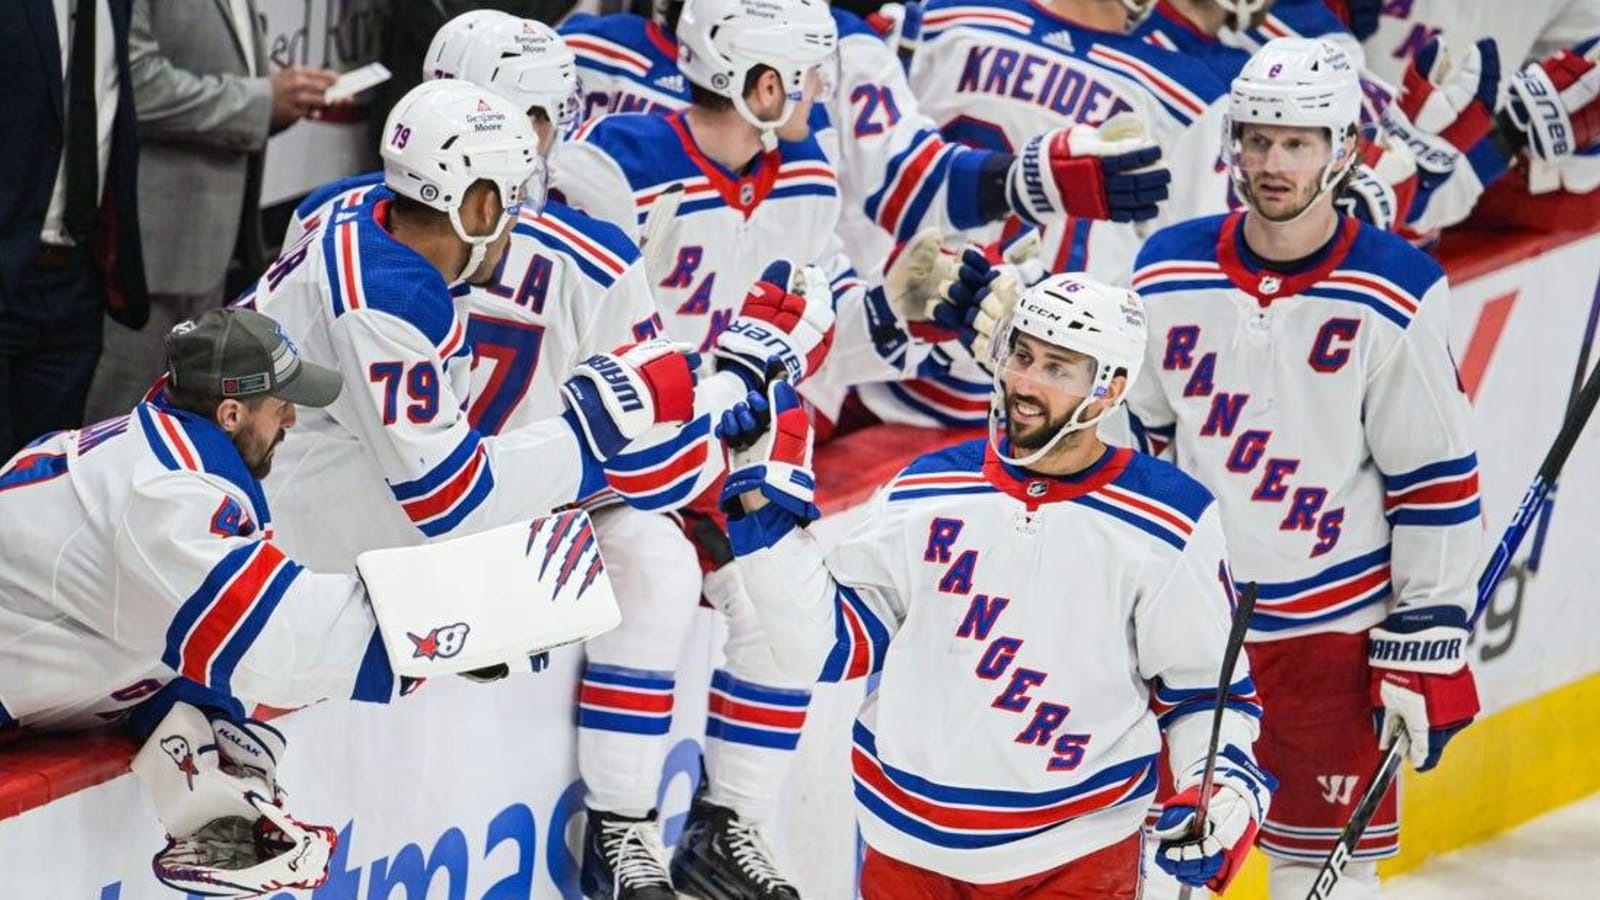 Rangers visit Blue Jackets trying to keep pace with rivals